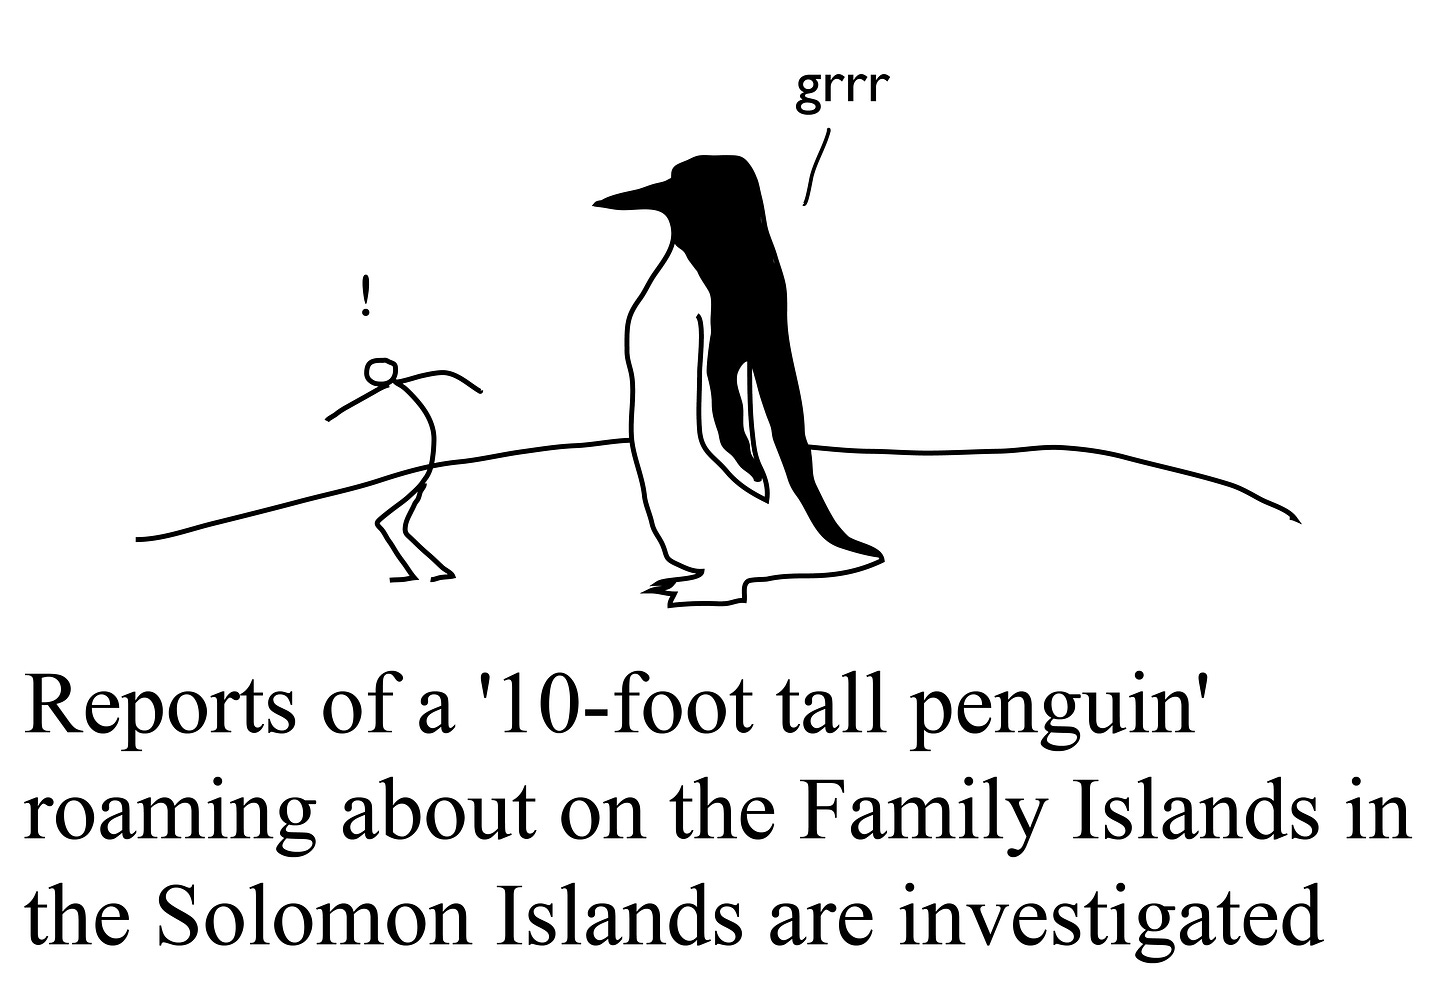 Reports of a '10-foot tall penguin' roaming about on the Family Islands in the Solomon Islands are investigated